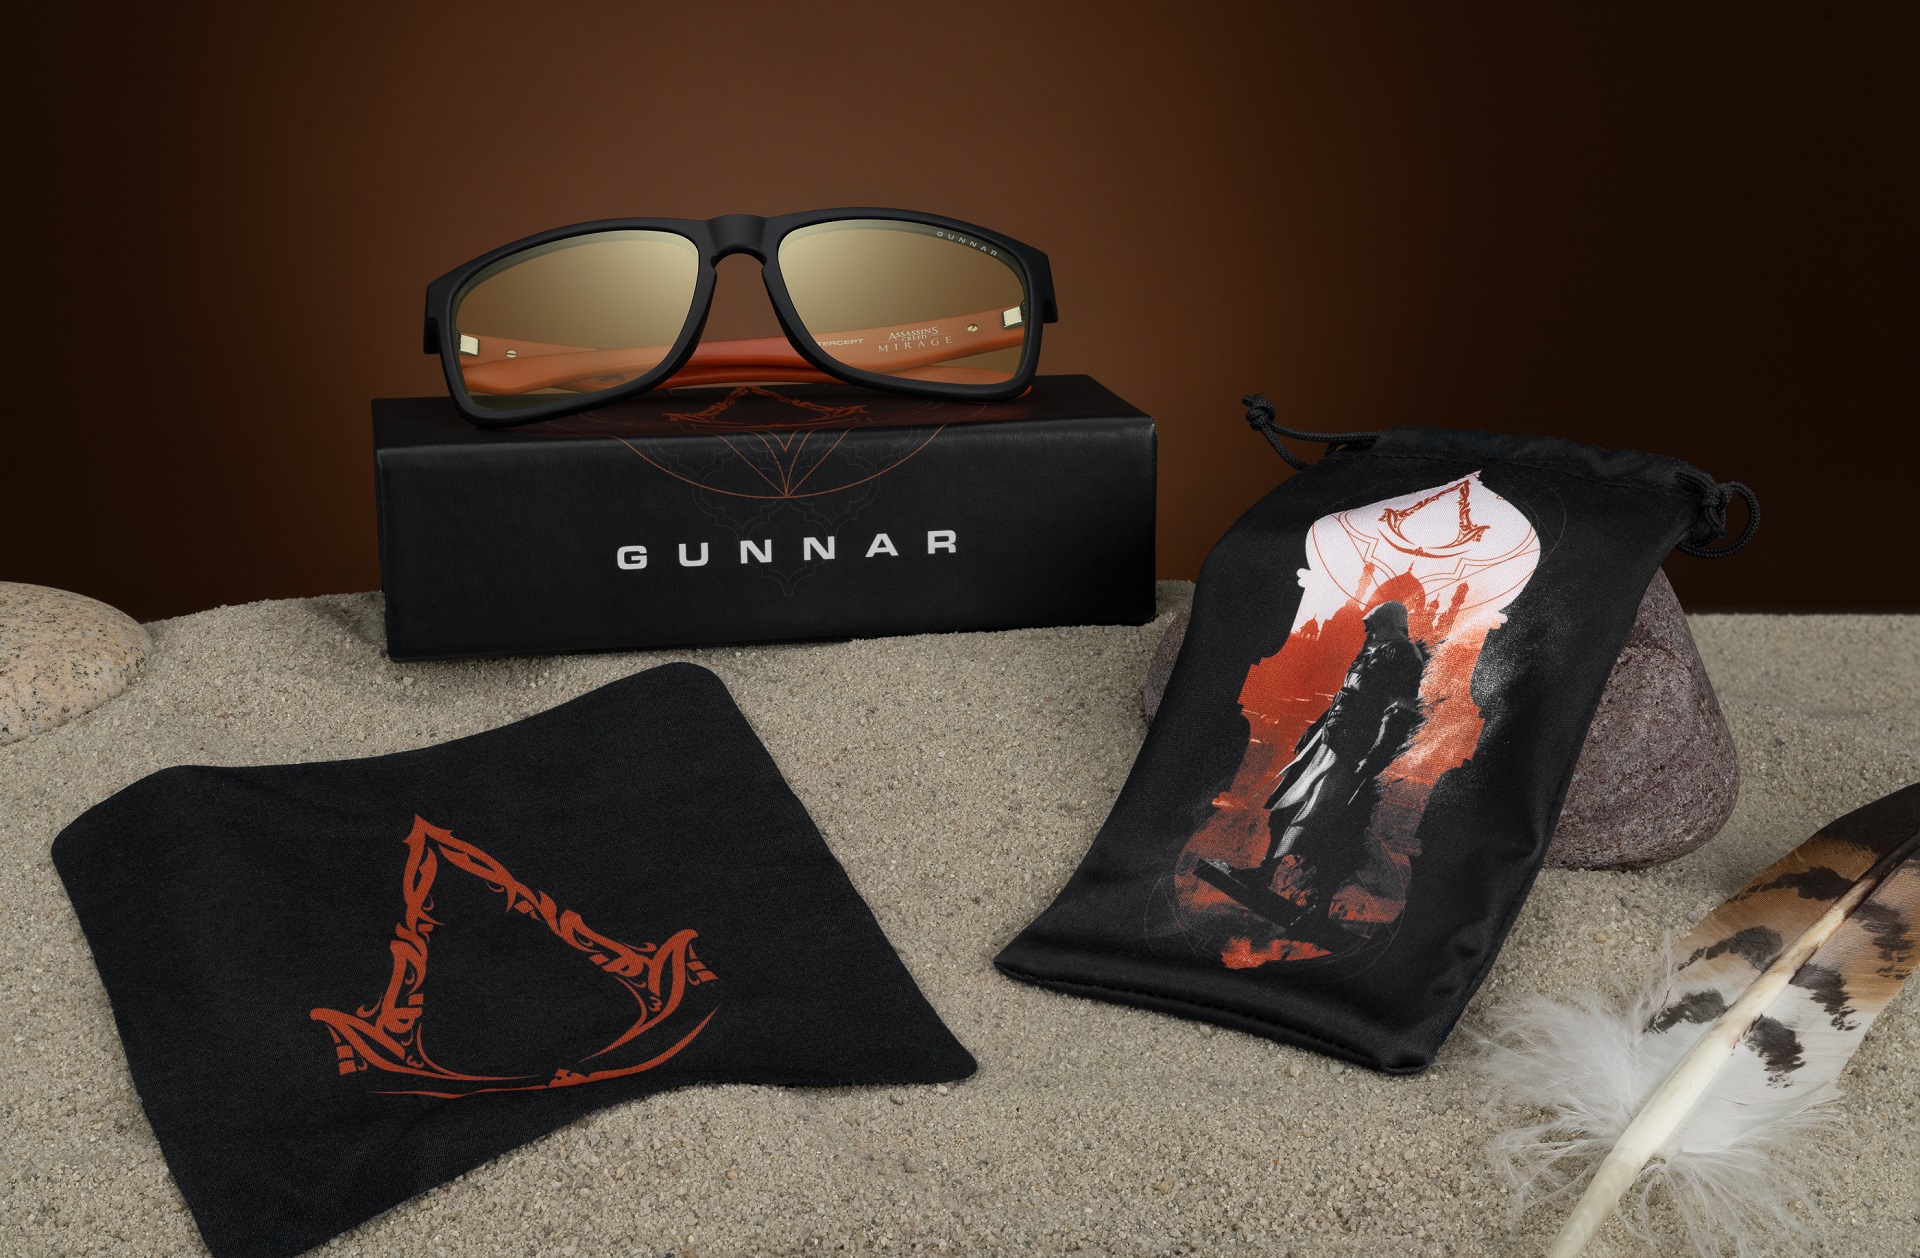 Gunnar gaming sunglasses protection, Men's Fashion, Watches & Accessories,  Sunglasses & Eyewear on Carousell